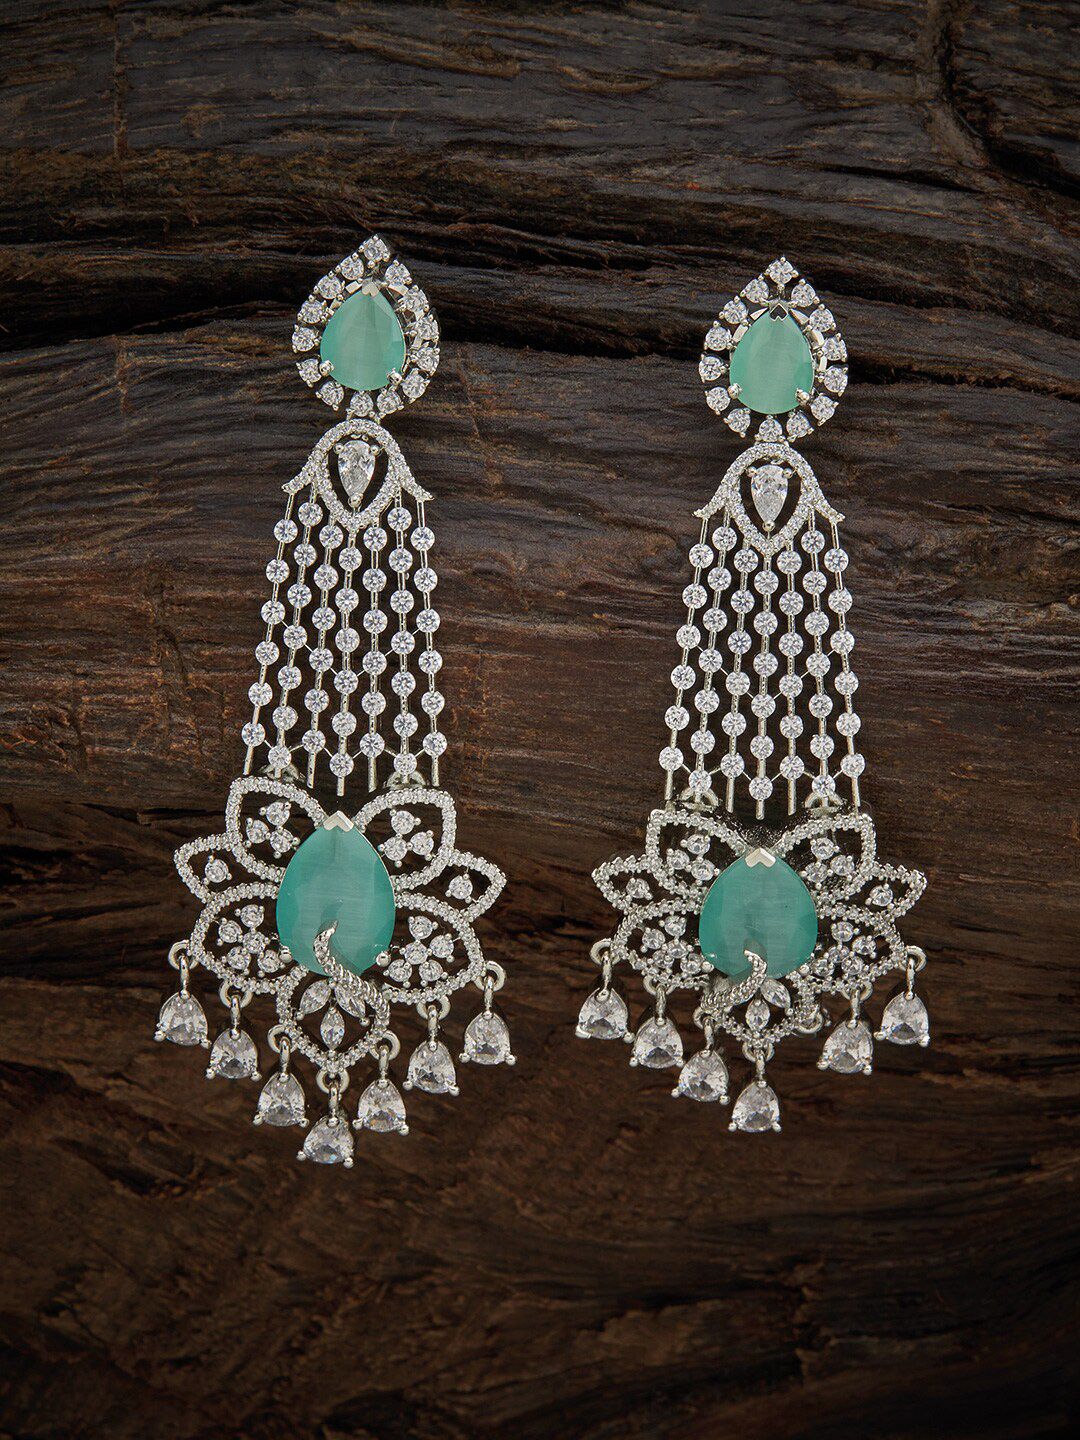 Kushal's Fashion Jewellery Sea Green Floral Ear Cuff Earrings Price in India